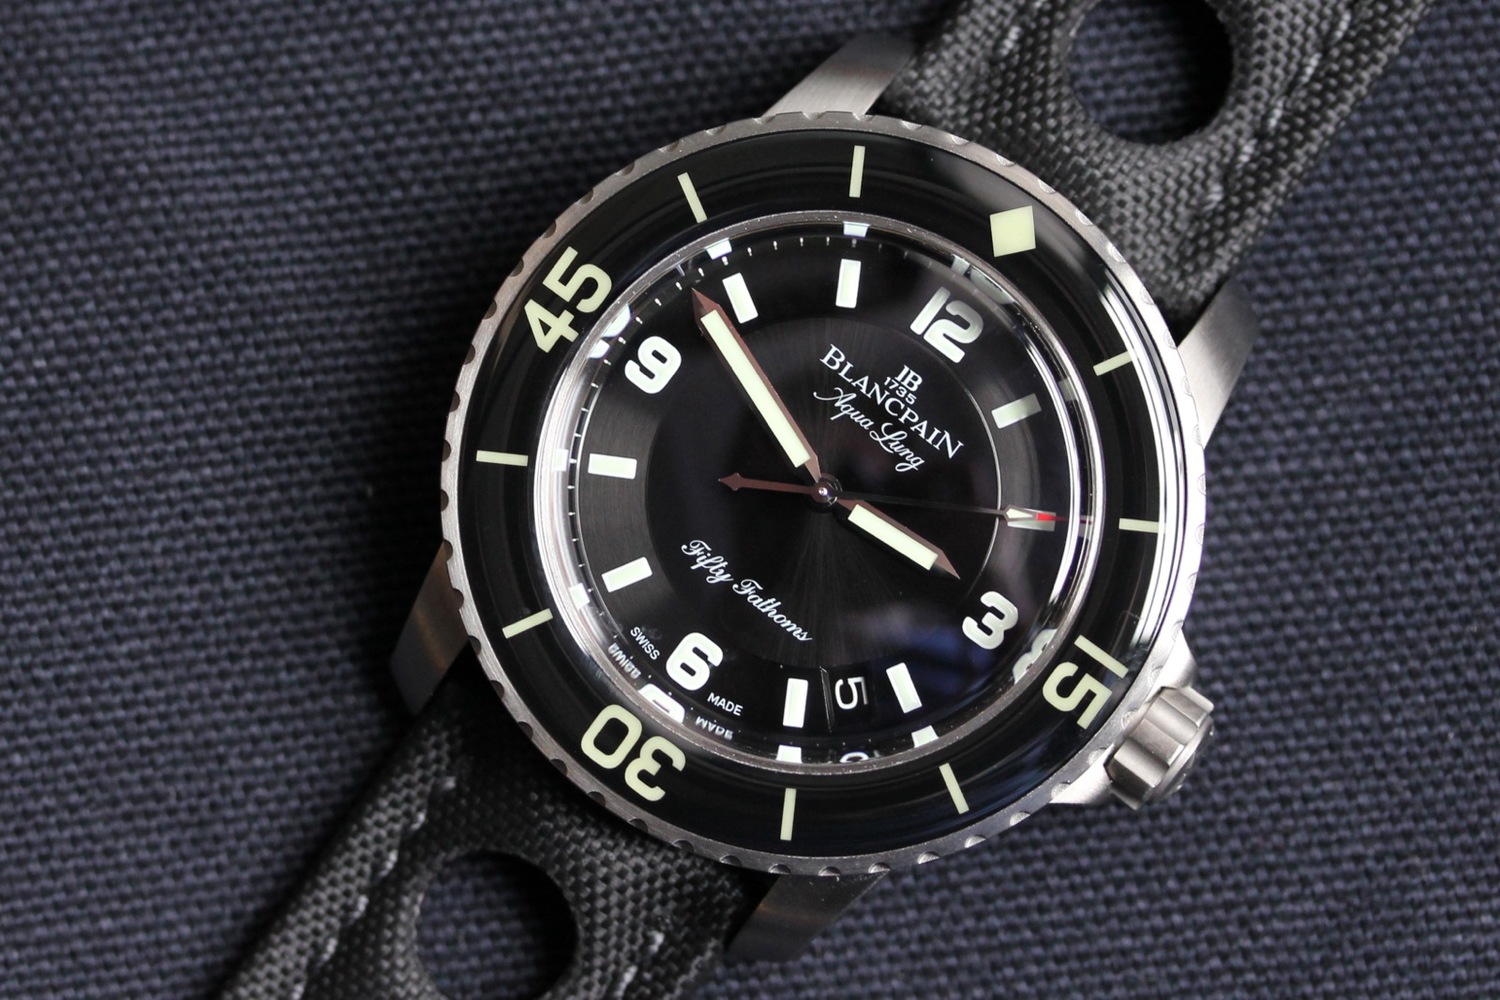 Hands-On: With The Blancpain Tribute To Fifty Fathoms Aqua Lung (Live Pics)  - Hodinkee